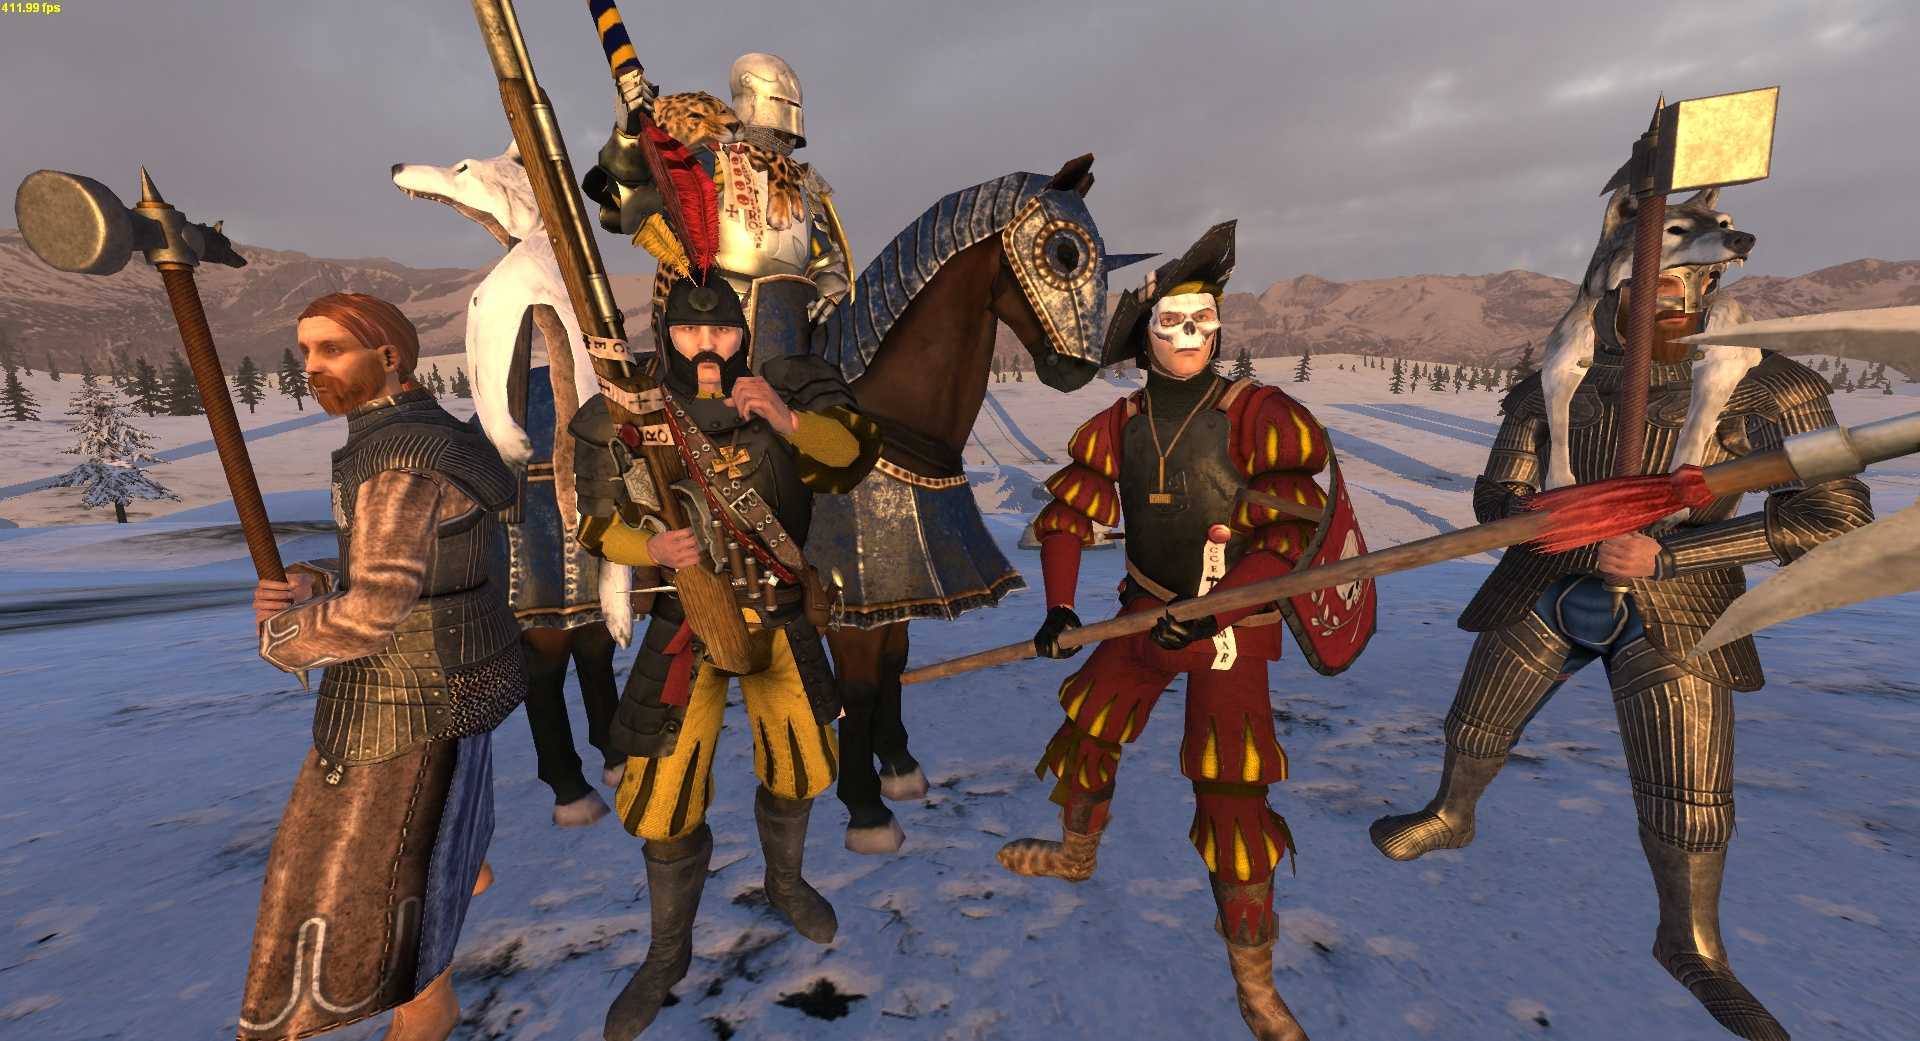 Warband warsword conquest. Mount and Blade Warsword Conquest. Mount and Blade Warband Warsword Conquest. Warsword Conquest-1.2.